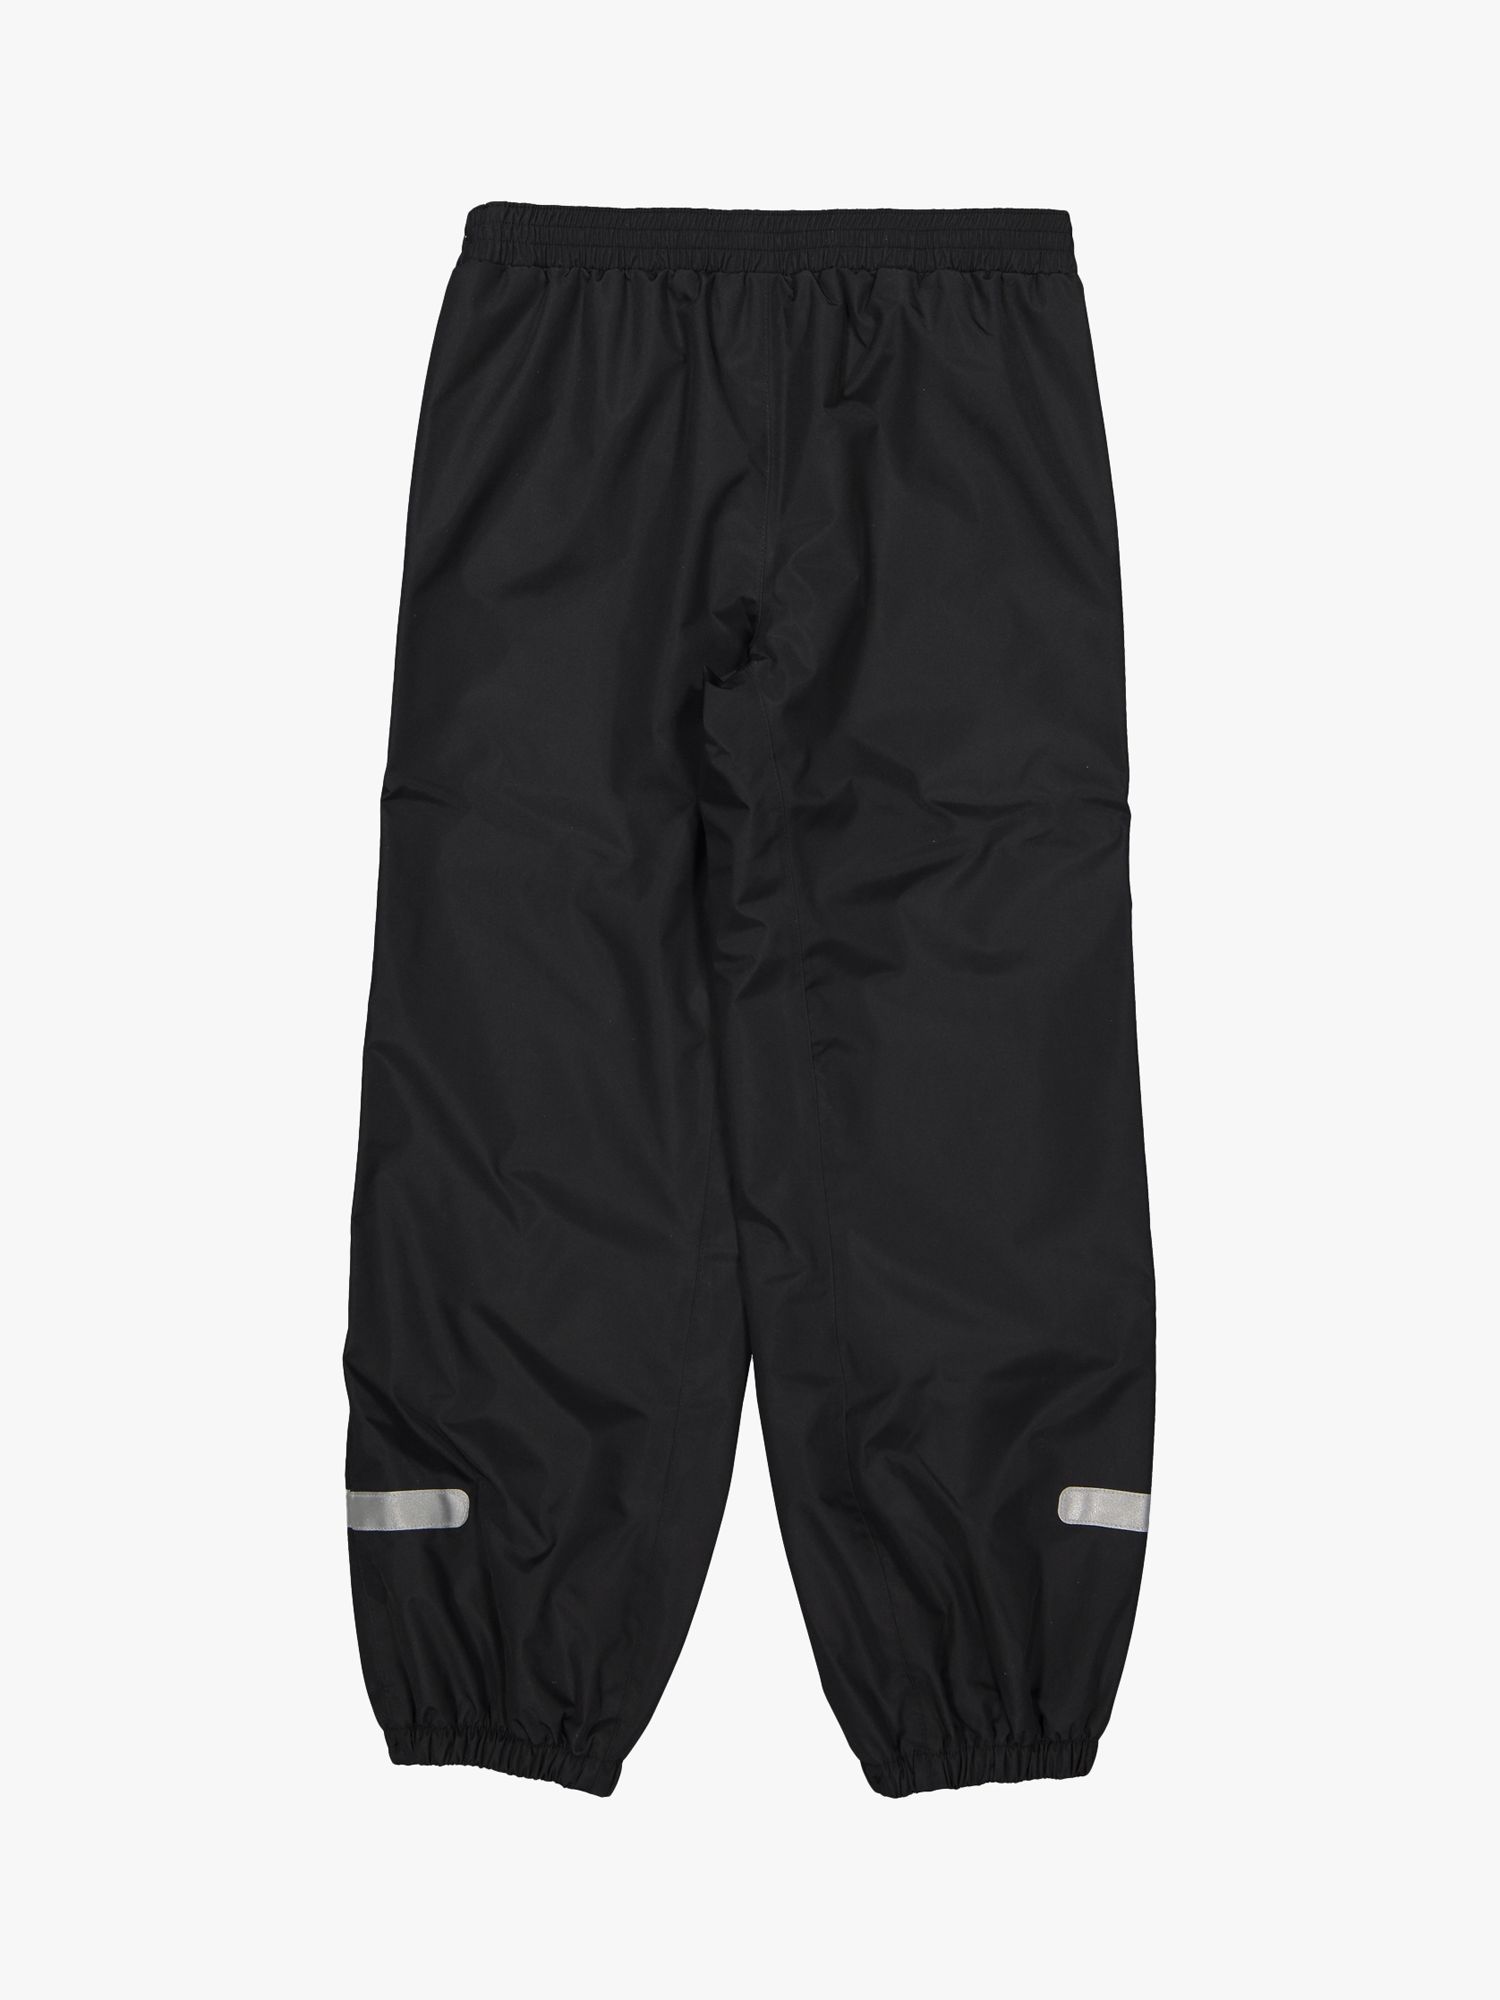 Buy Polarn O. Pyret Kids' Shell Trousers, Black Online at johnlewis.com